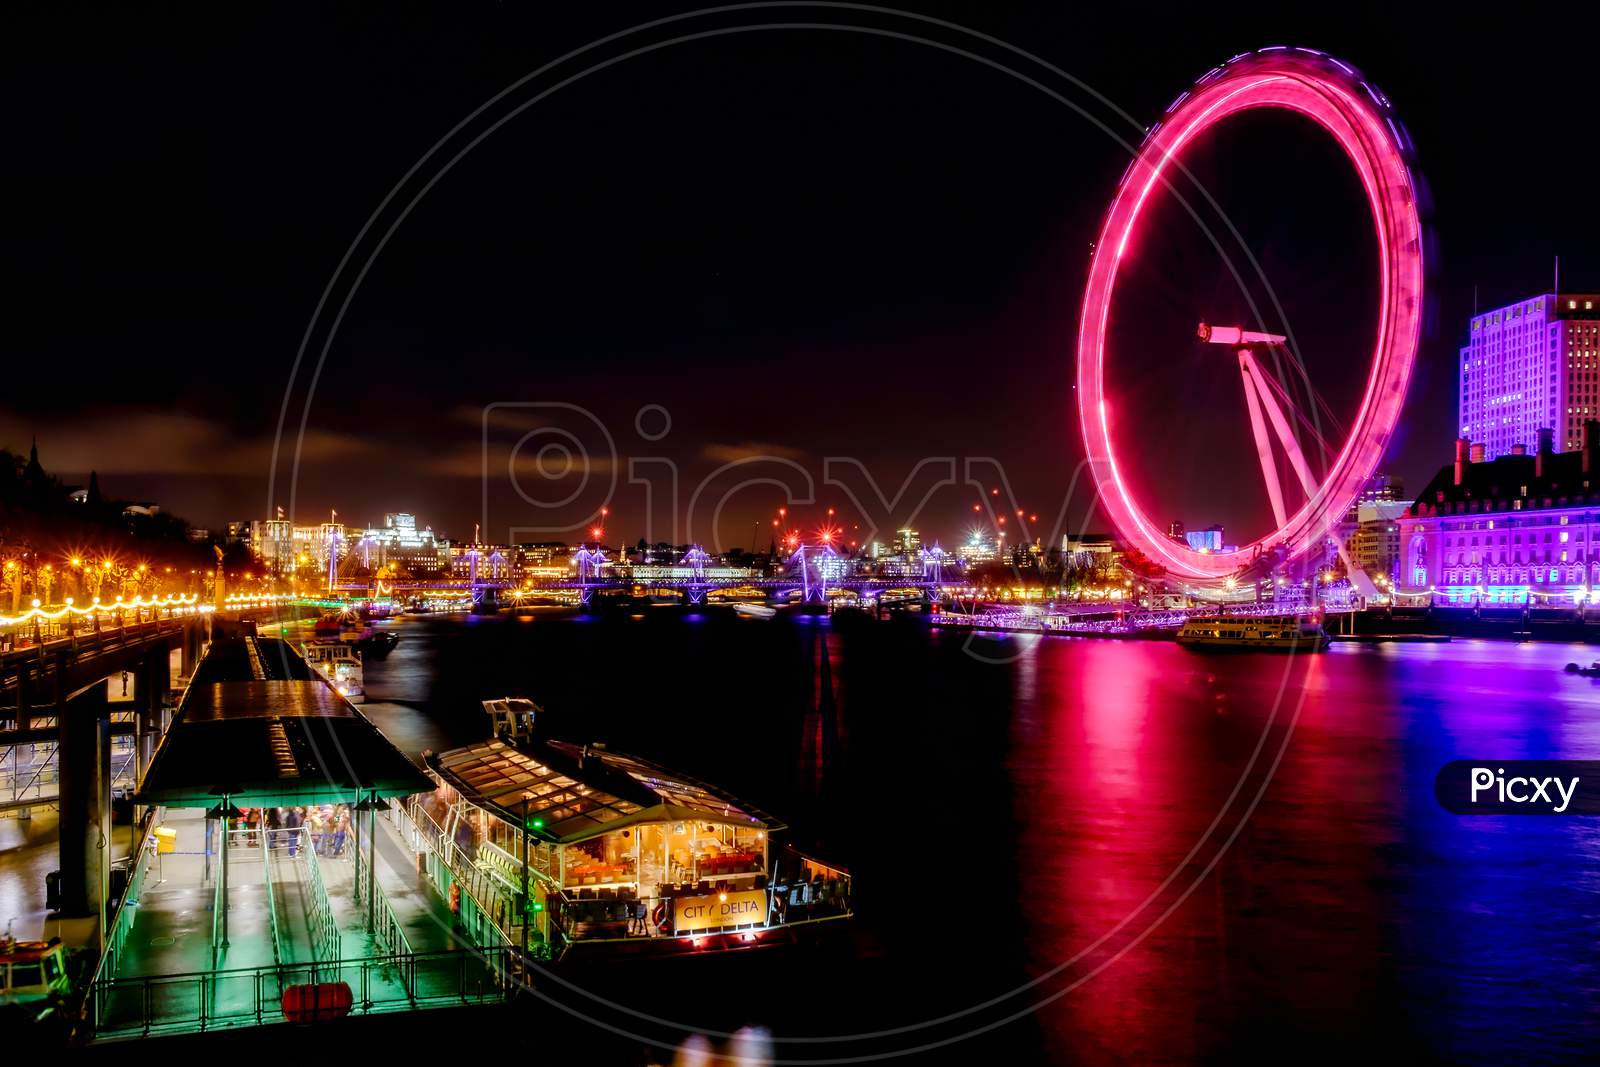 View Of The London Eye At Night